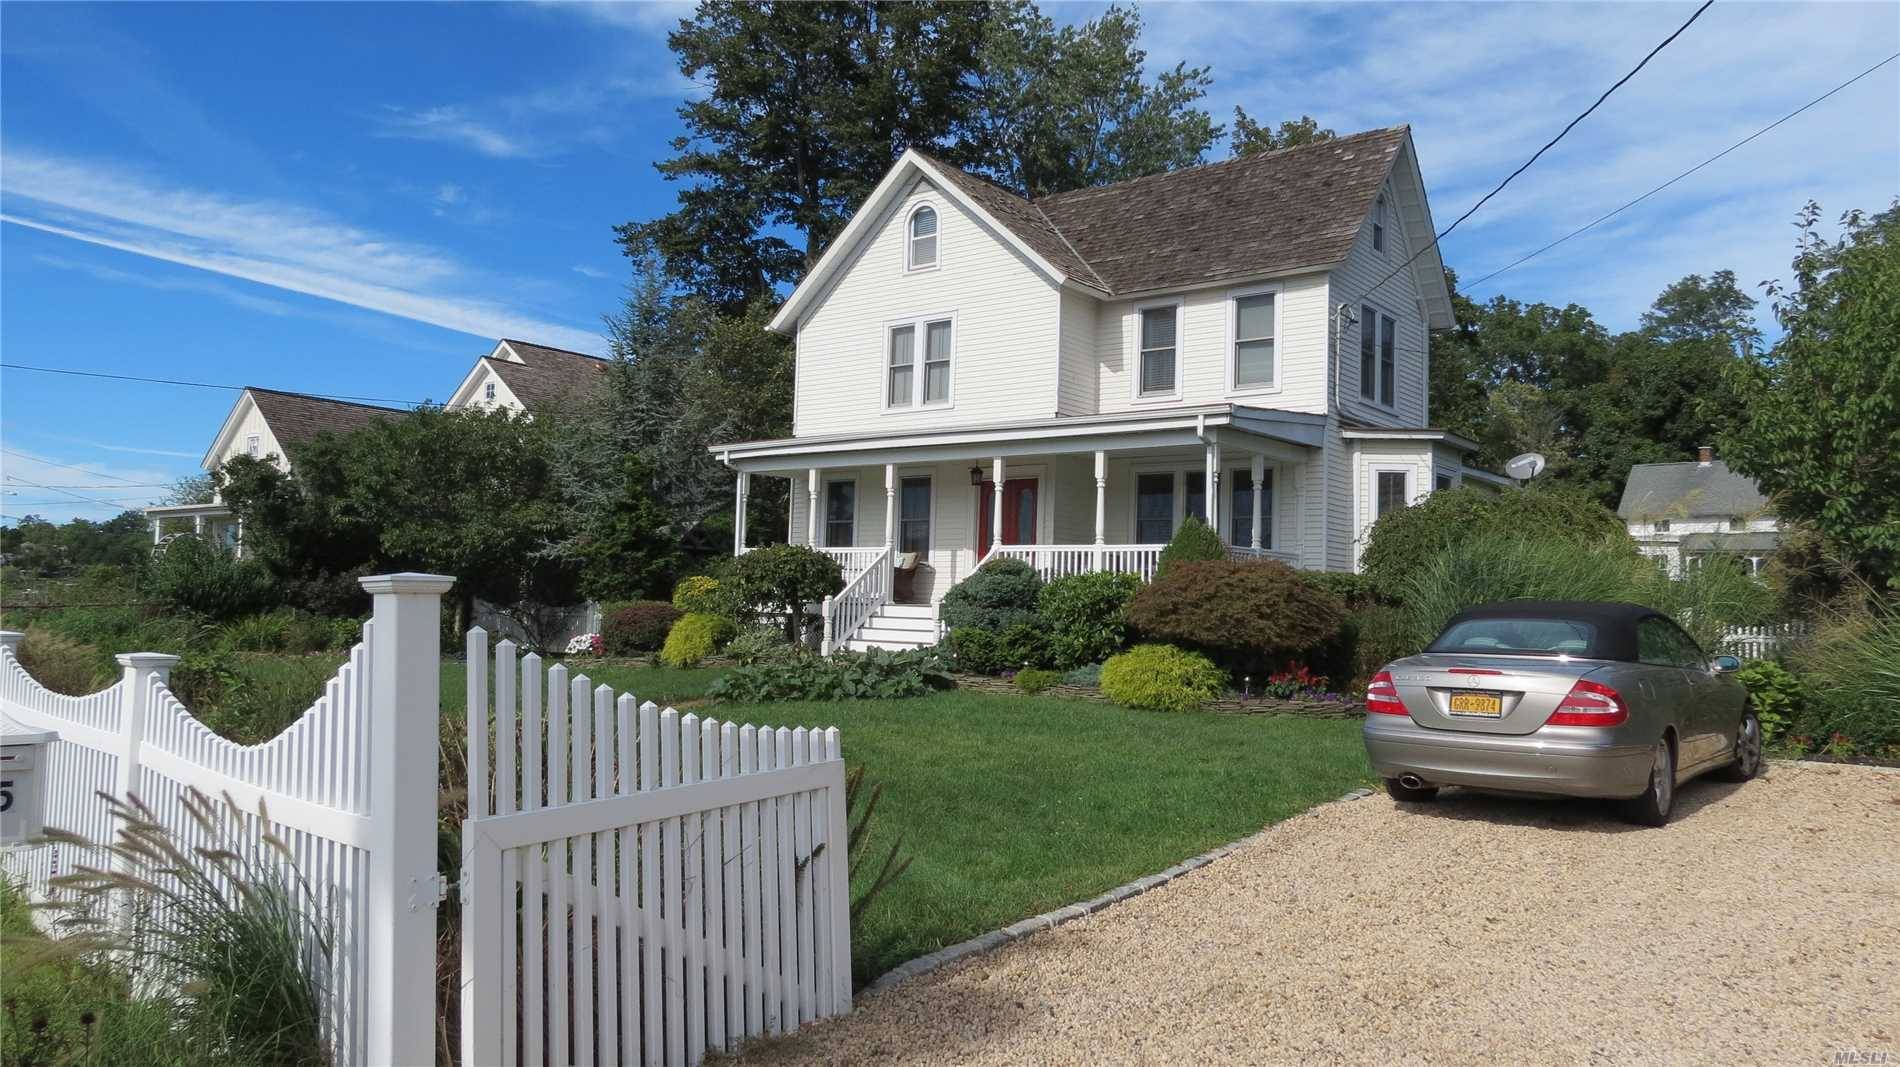 Charming Renovated 1800'S Victorian With Breathtaking Waterviews Of Setauket Harbor Deeded Access This Home Boasts Family Room Fieldstone Fireplace, Hardwood Floors, 2 Zone Central Air Conditioning, Det 2 Story Outbuilding.